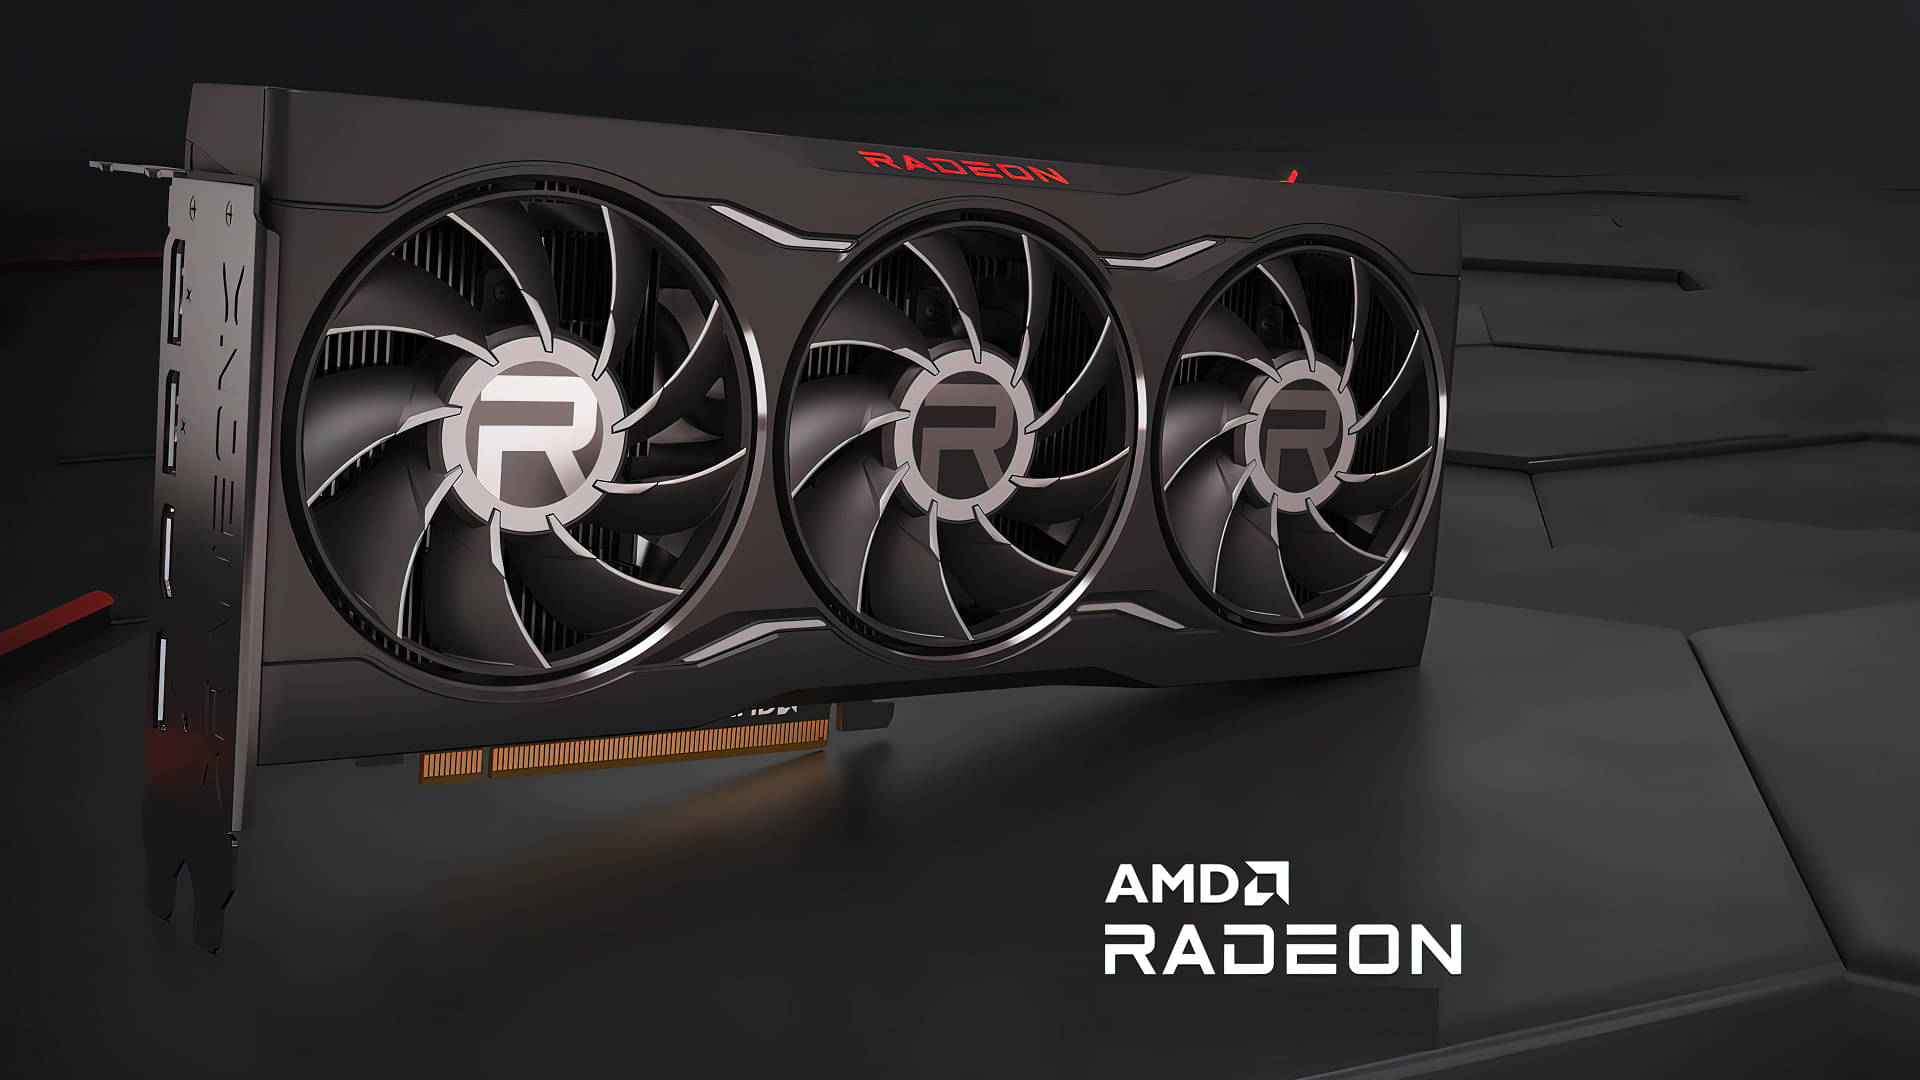 An image showing a Radeon graphics card from AMD